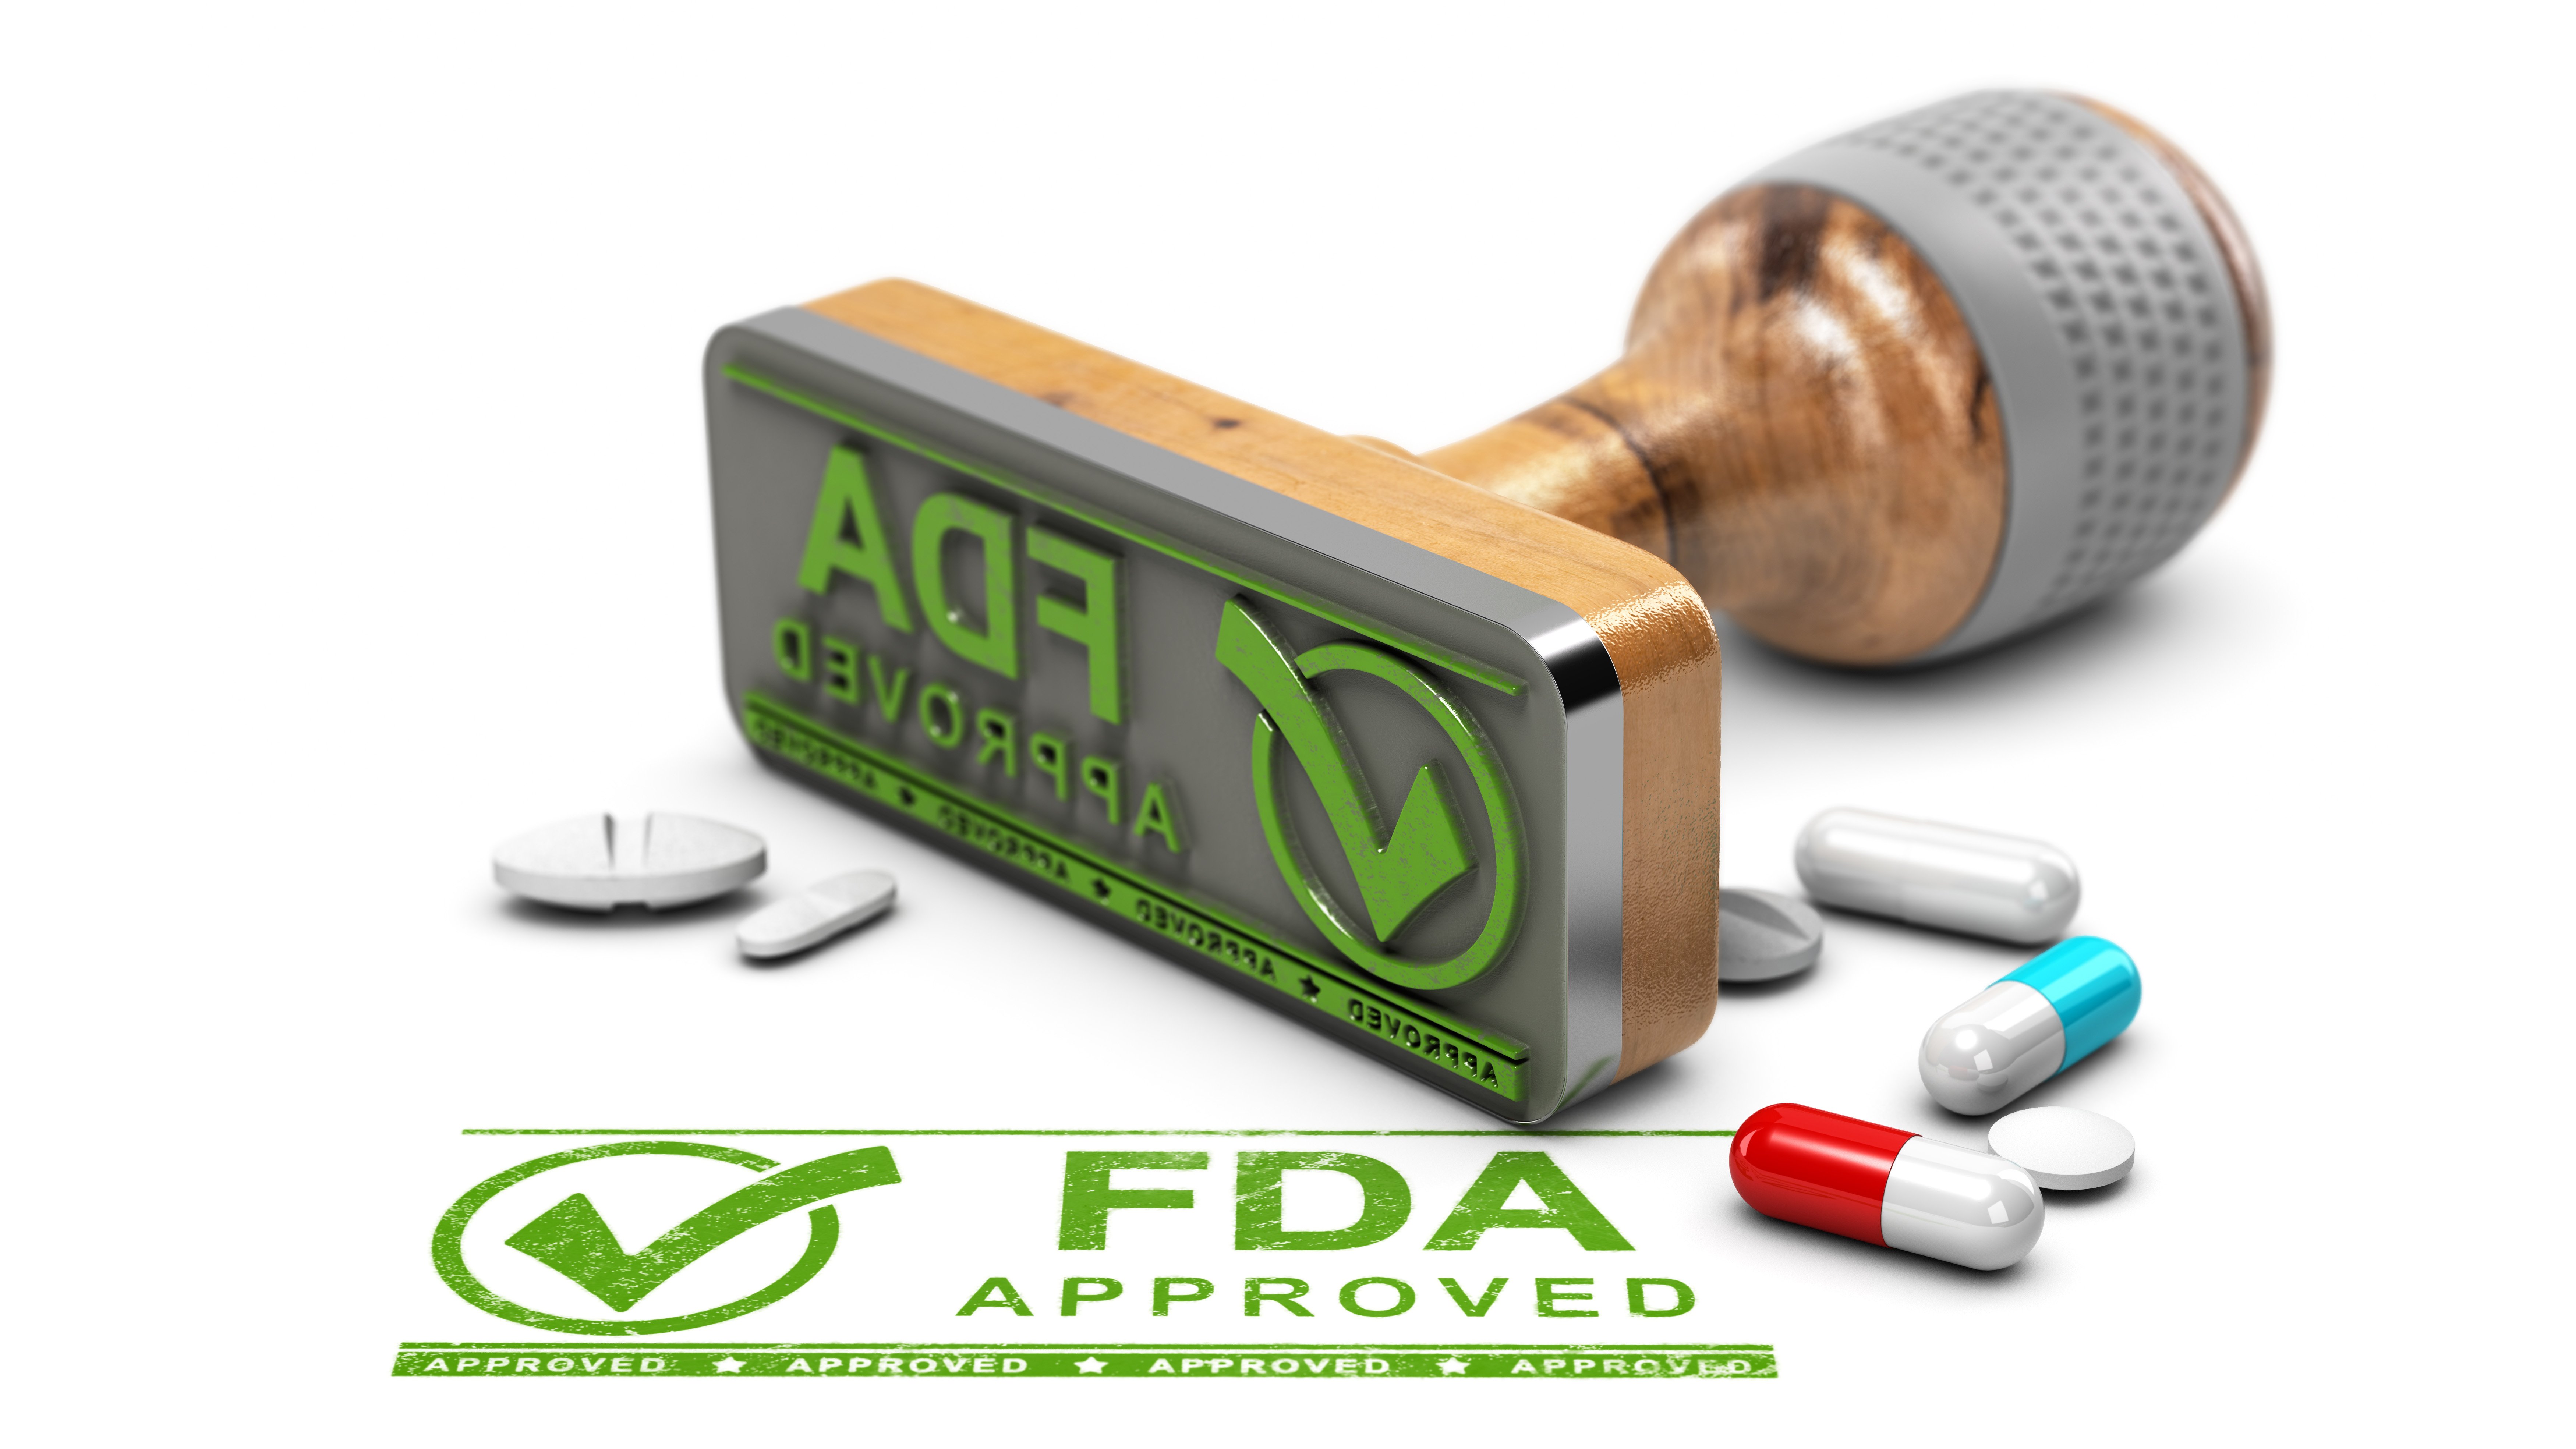 FDA approved stamp regulations yes go